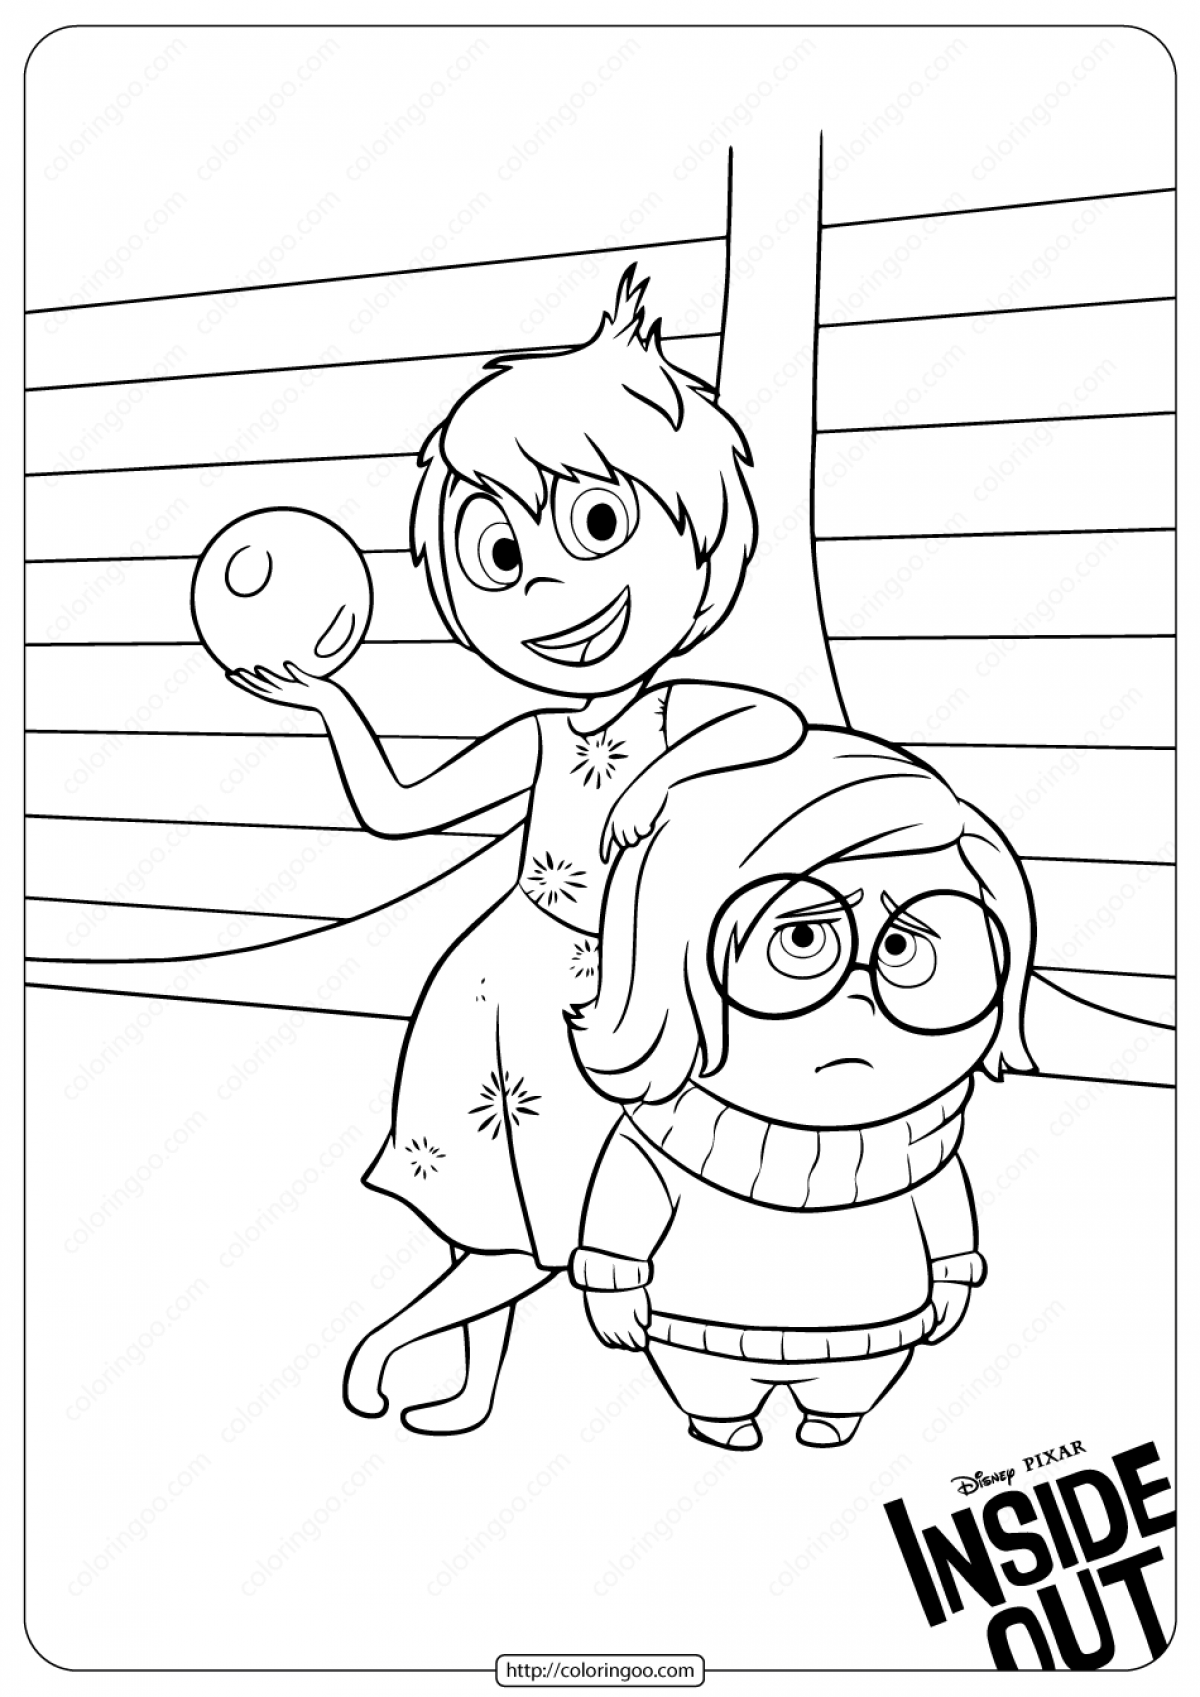 Printable Inside Out Joy and Sadness Coloring Pages